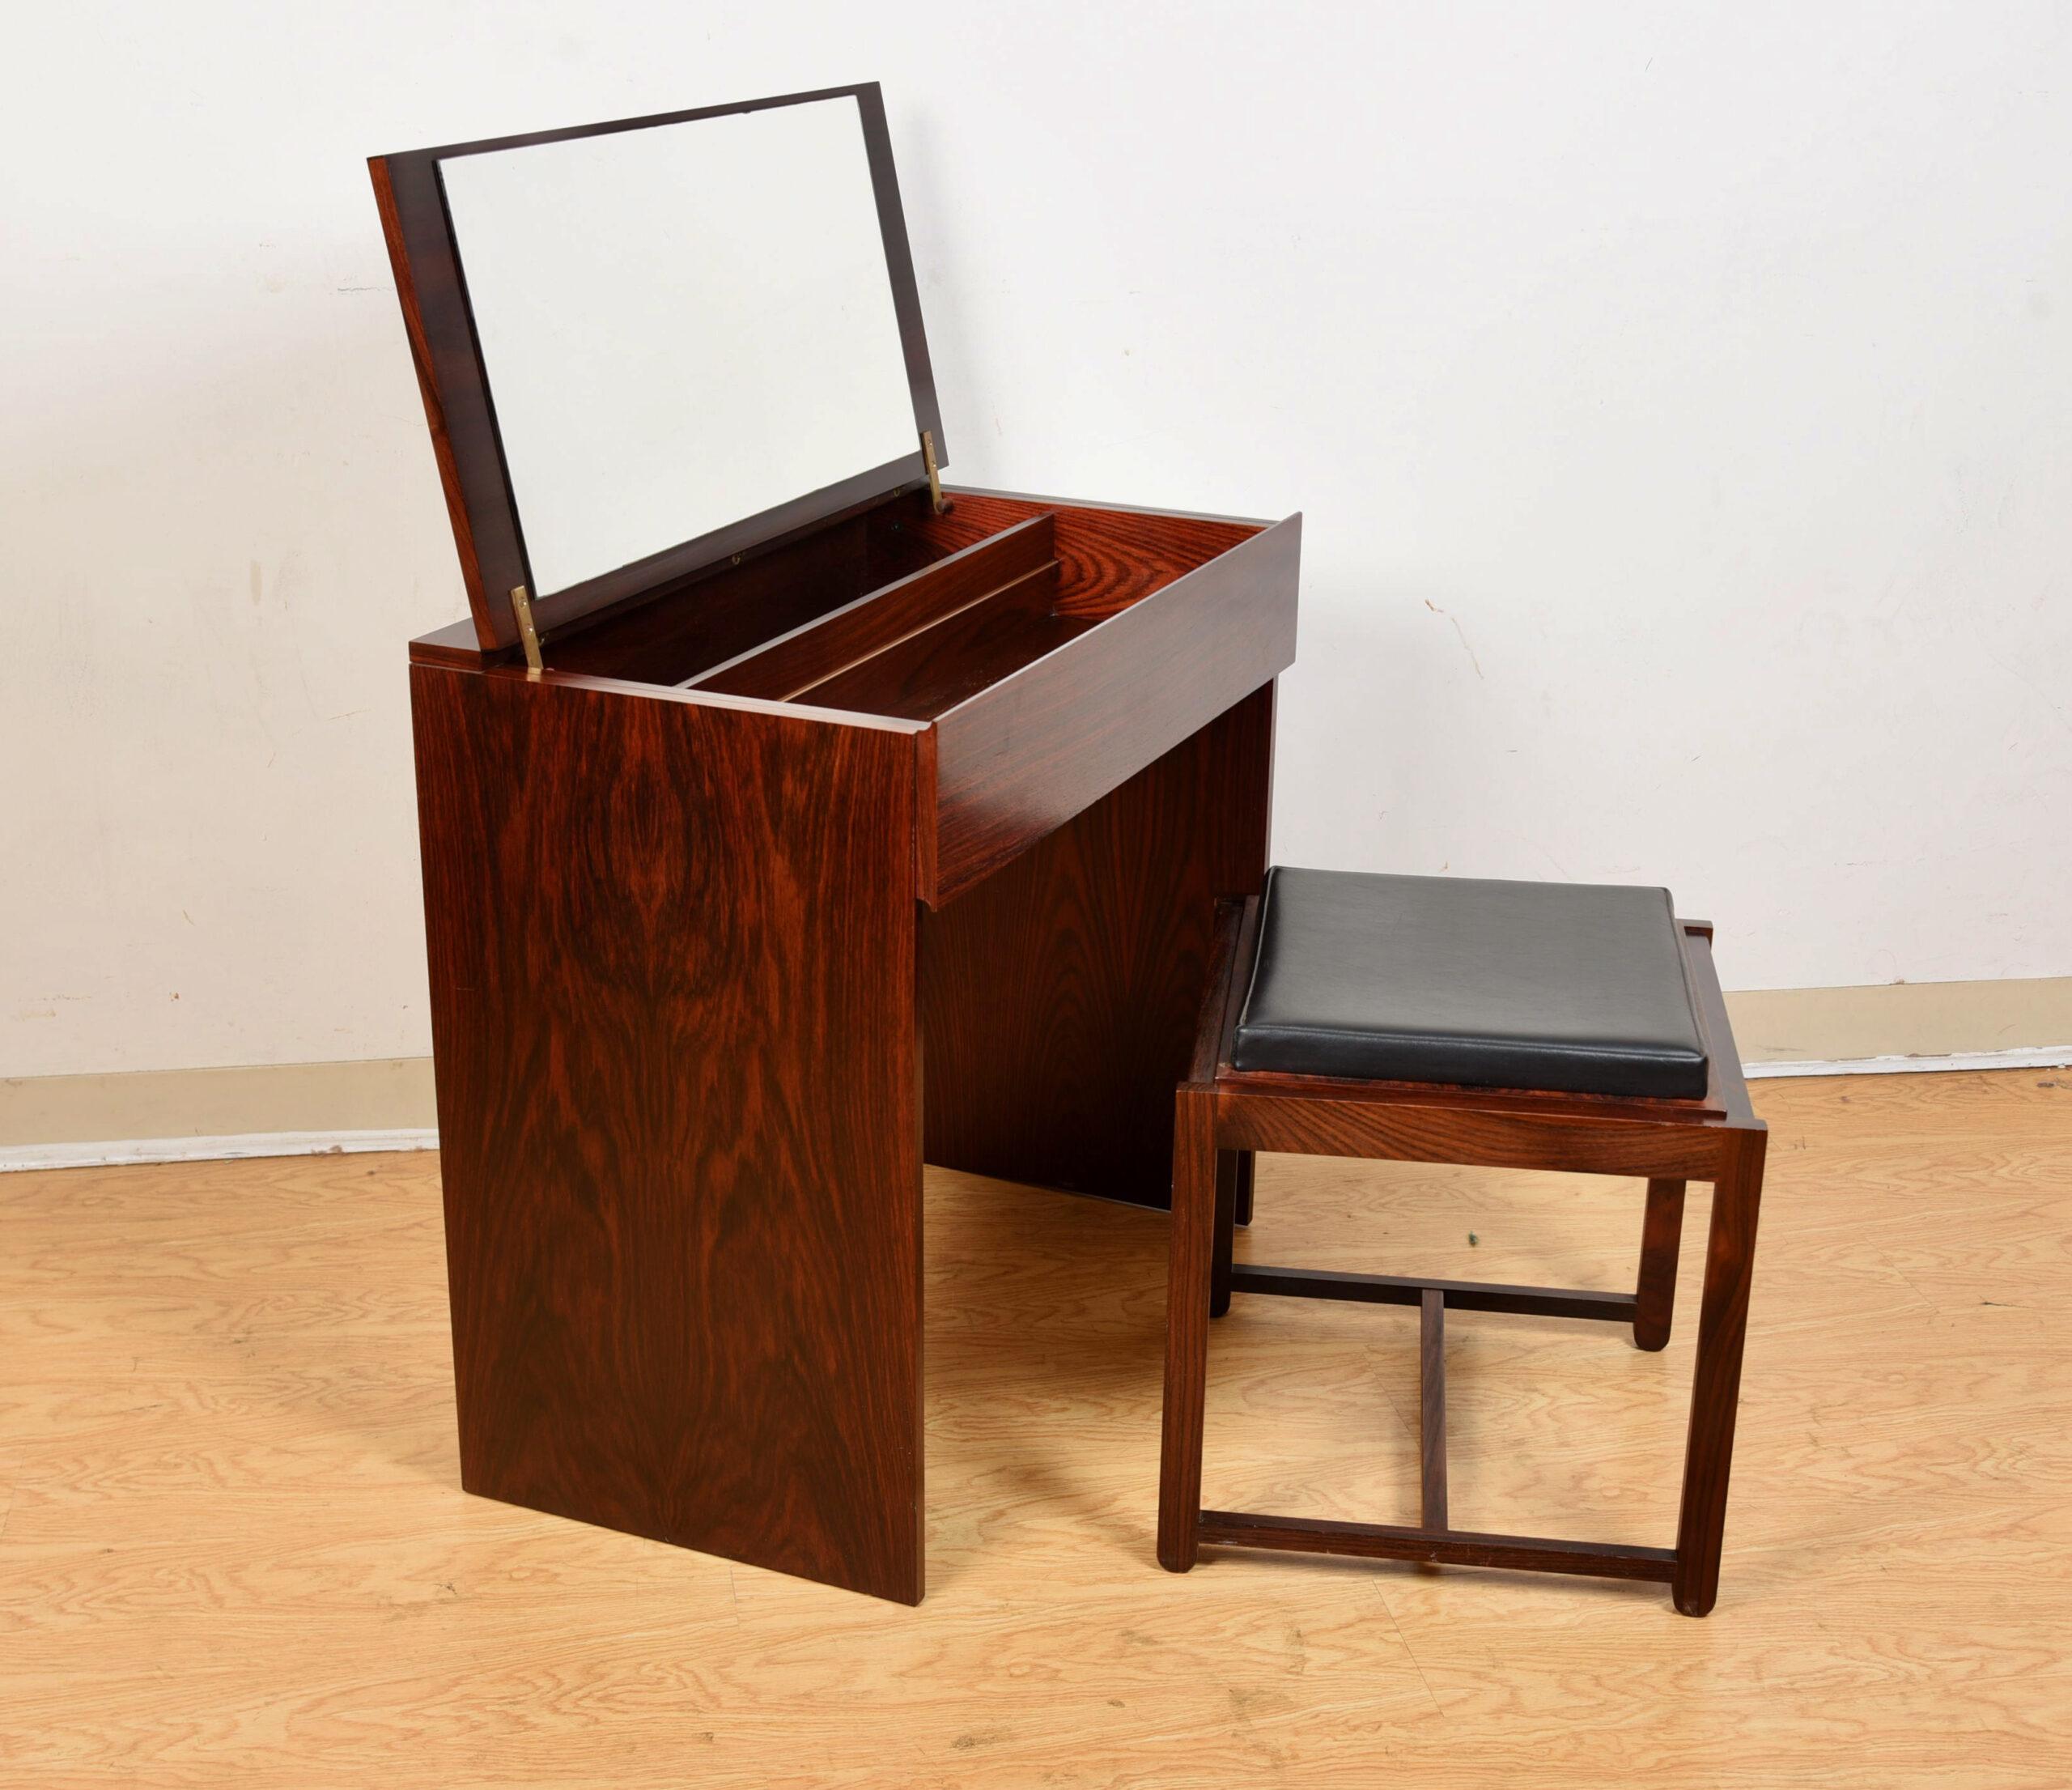 Vanity + Matching Flip-Over Stool / Table in Danish Rosewood In Good Condition For Sale In Kensington, MD